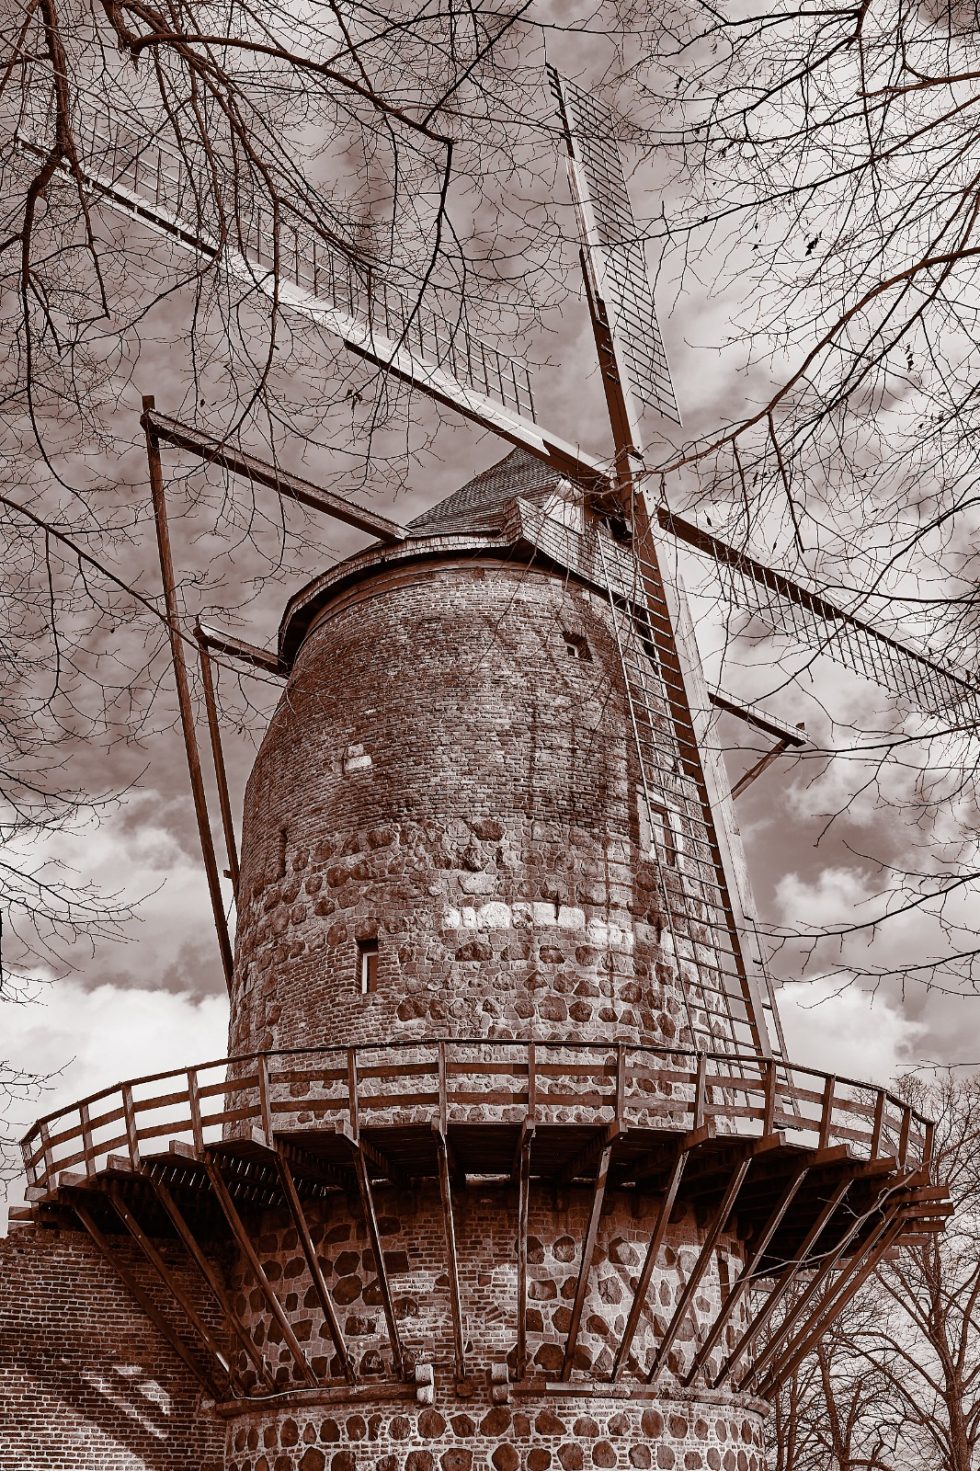 Mill in the old customs fortress of Zons.